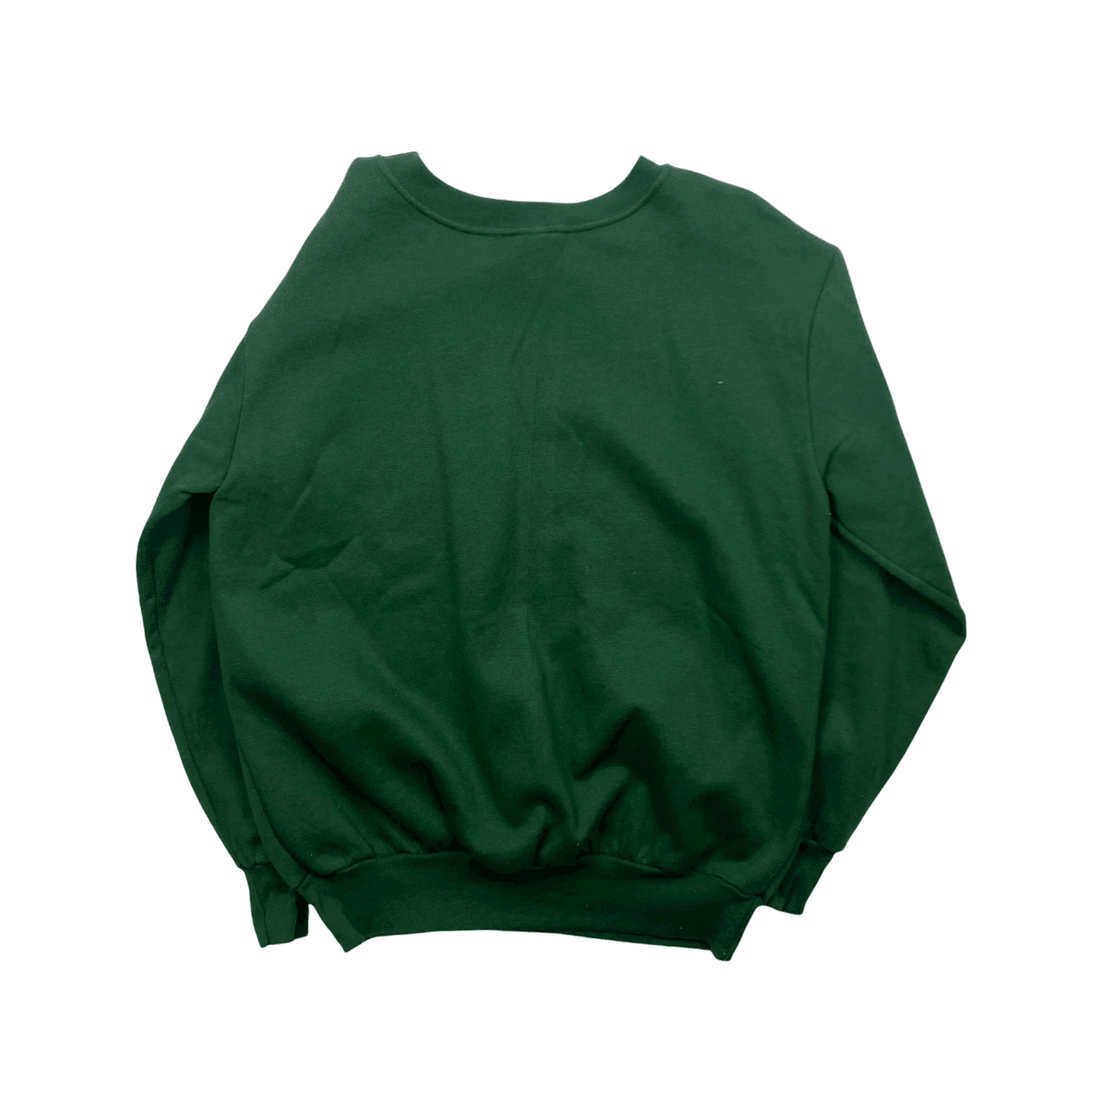 Vintage 90s Green NFL Green Bay Packers Spell-Out Sweatshirt - Large (Recommended Size - Medium) - The Streetwear Studio